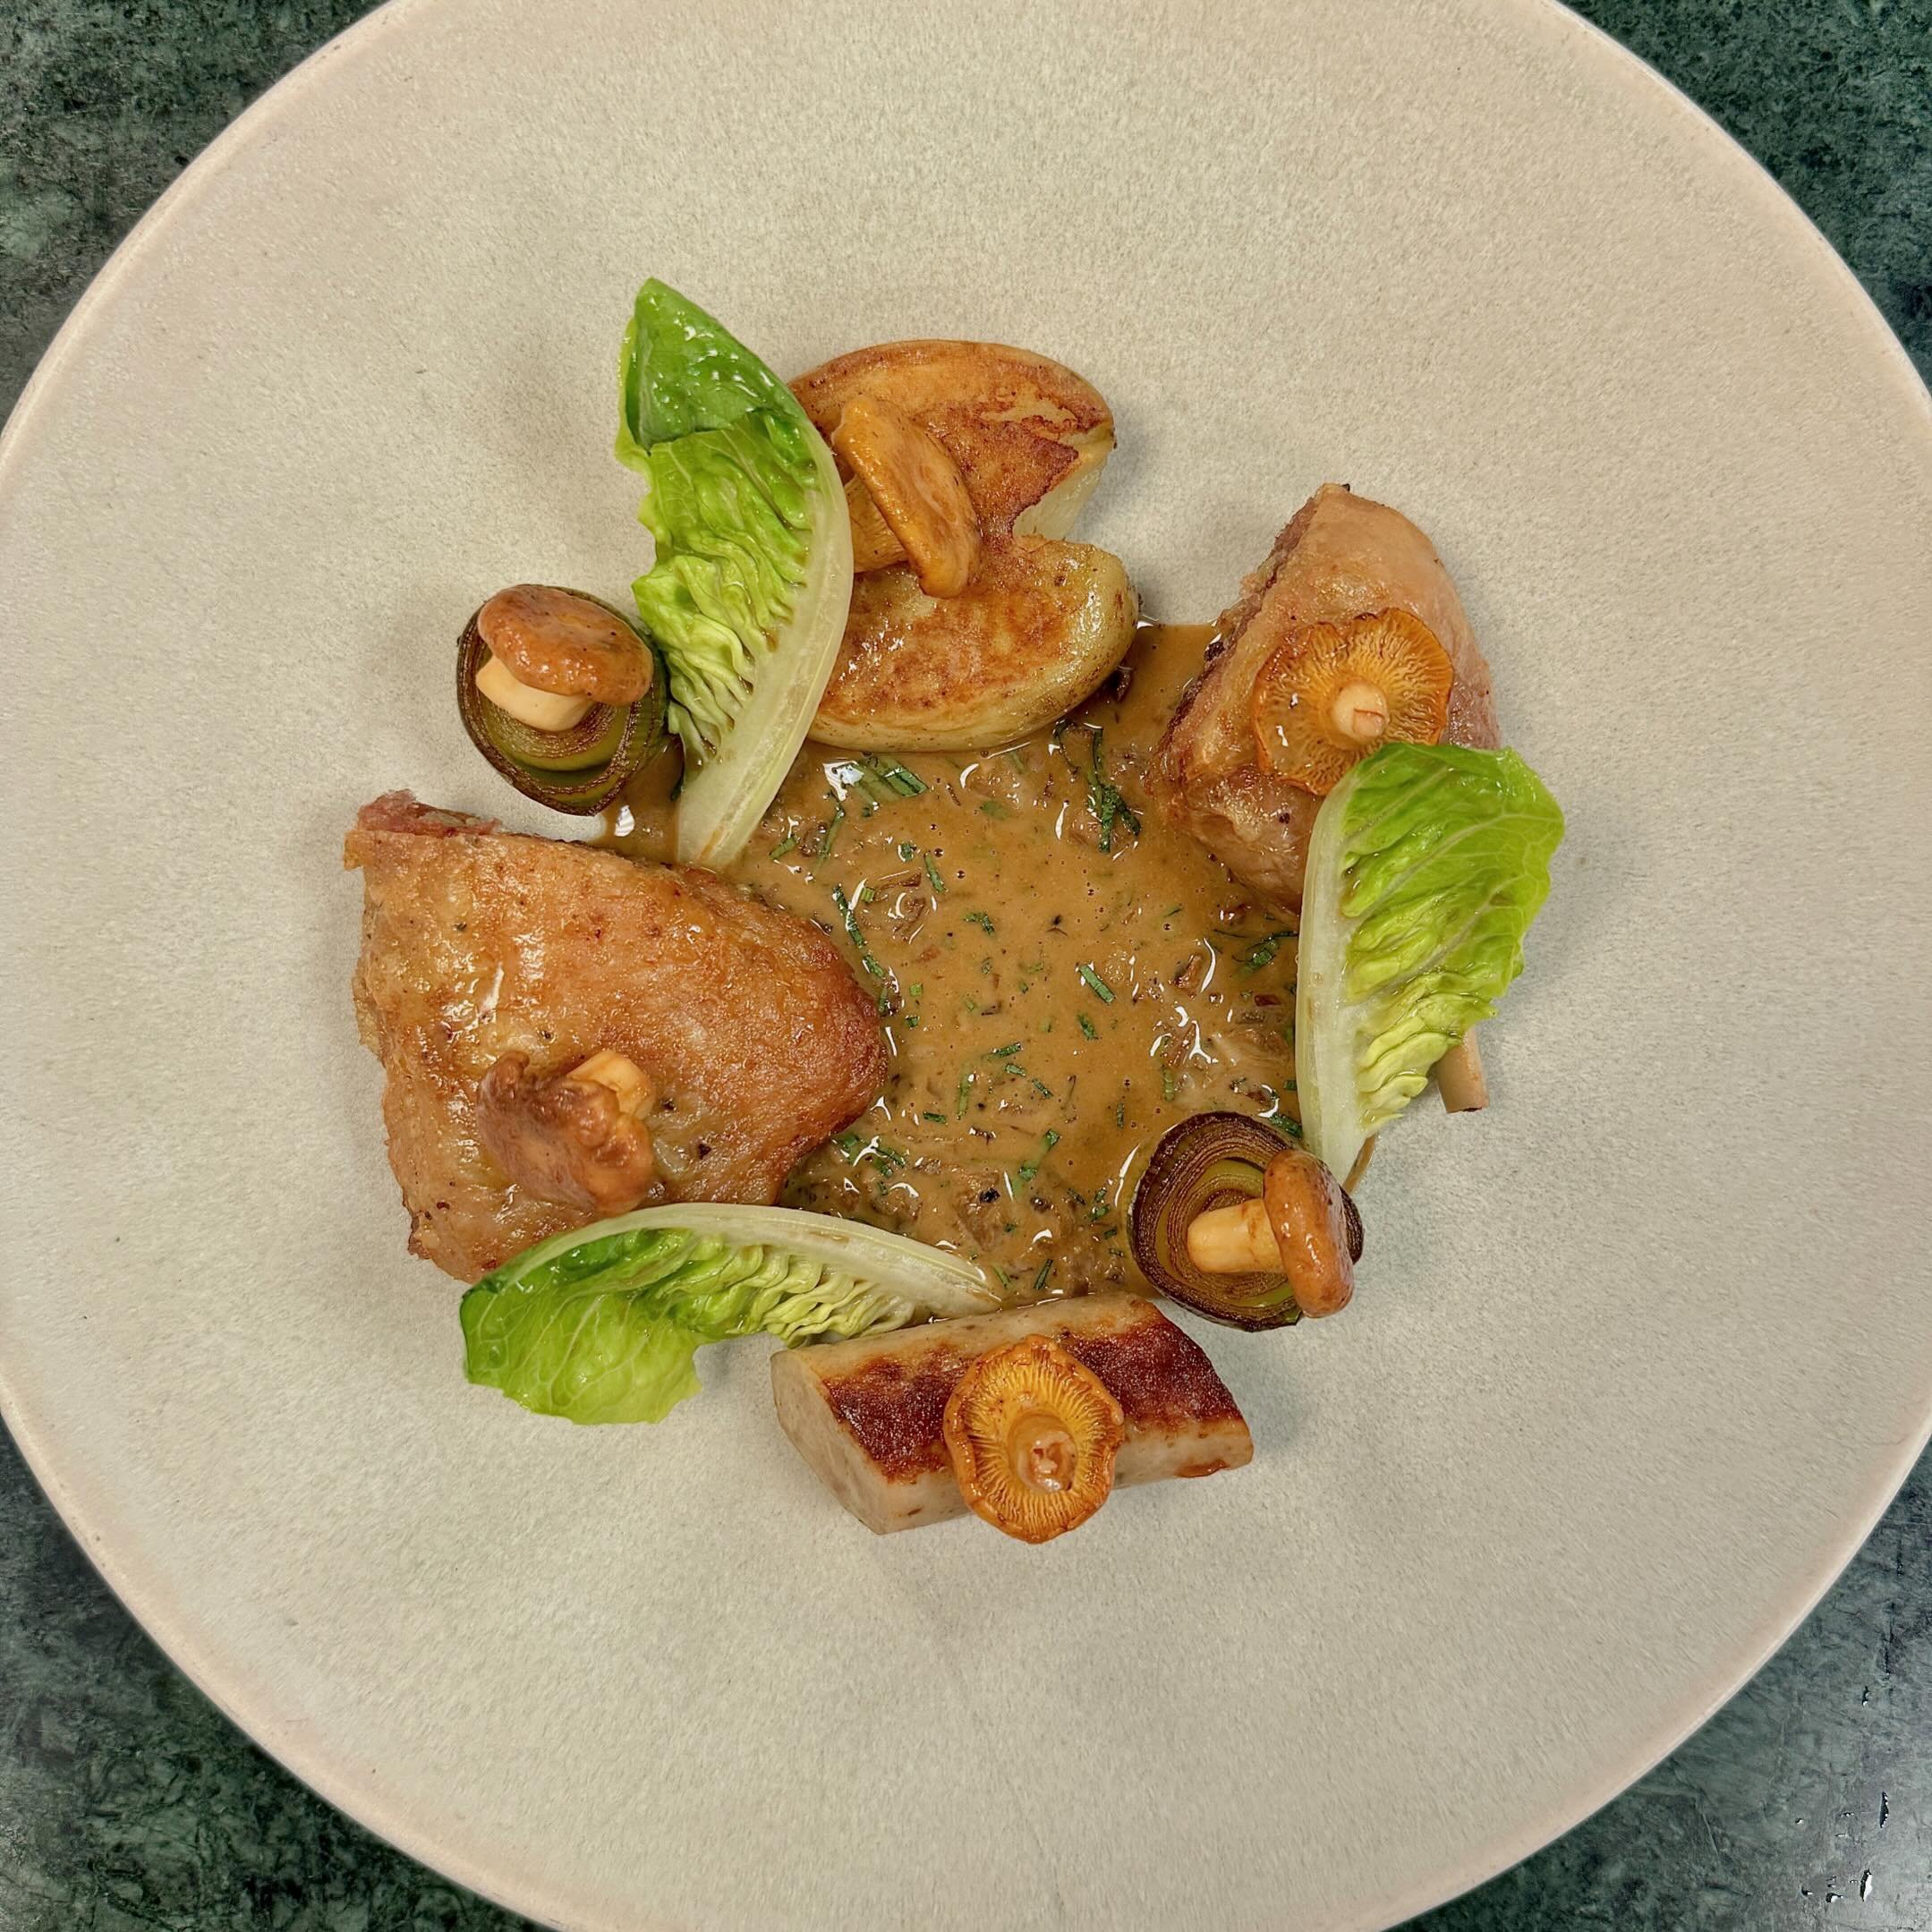 𝗡𝗲𝘄 𝗗𝗶𝘀𝗵 
Confit leg of guinea fowl with Alsace white sausage, braised leek, girolles, new season Jersey Royals, cep cream
&bull;
Photo credit and dish created by our Head Chef @richhstagram
&bull;
&bull;
&bull;
#newdish #guineafowl #leek #gir